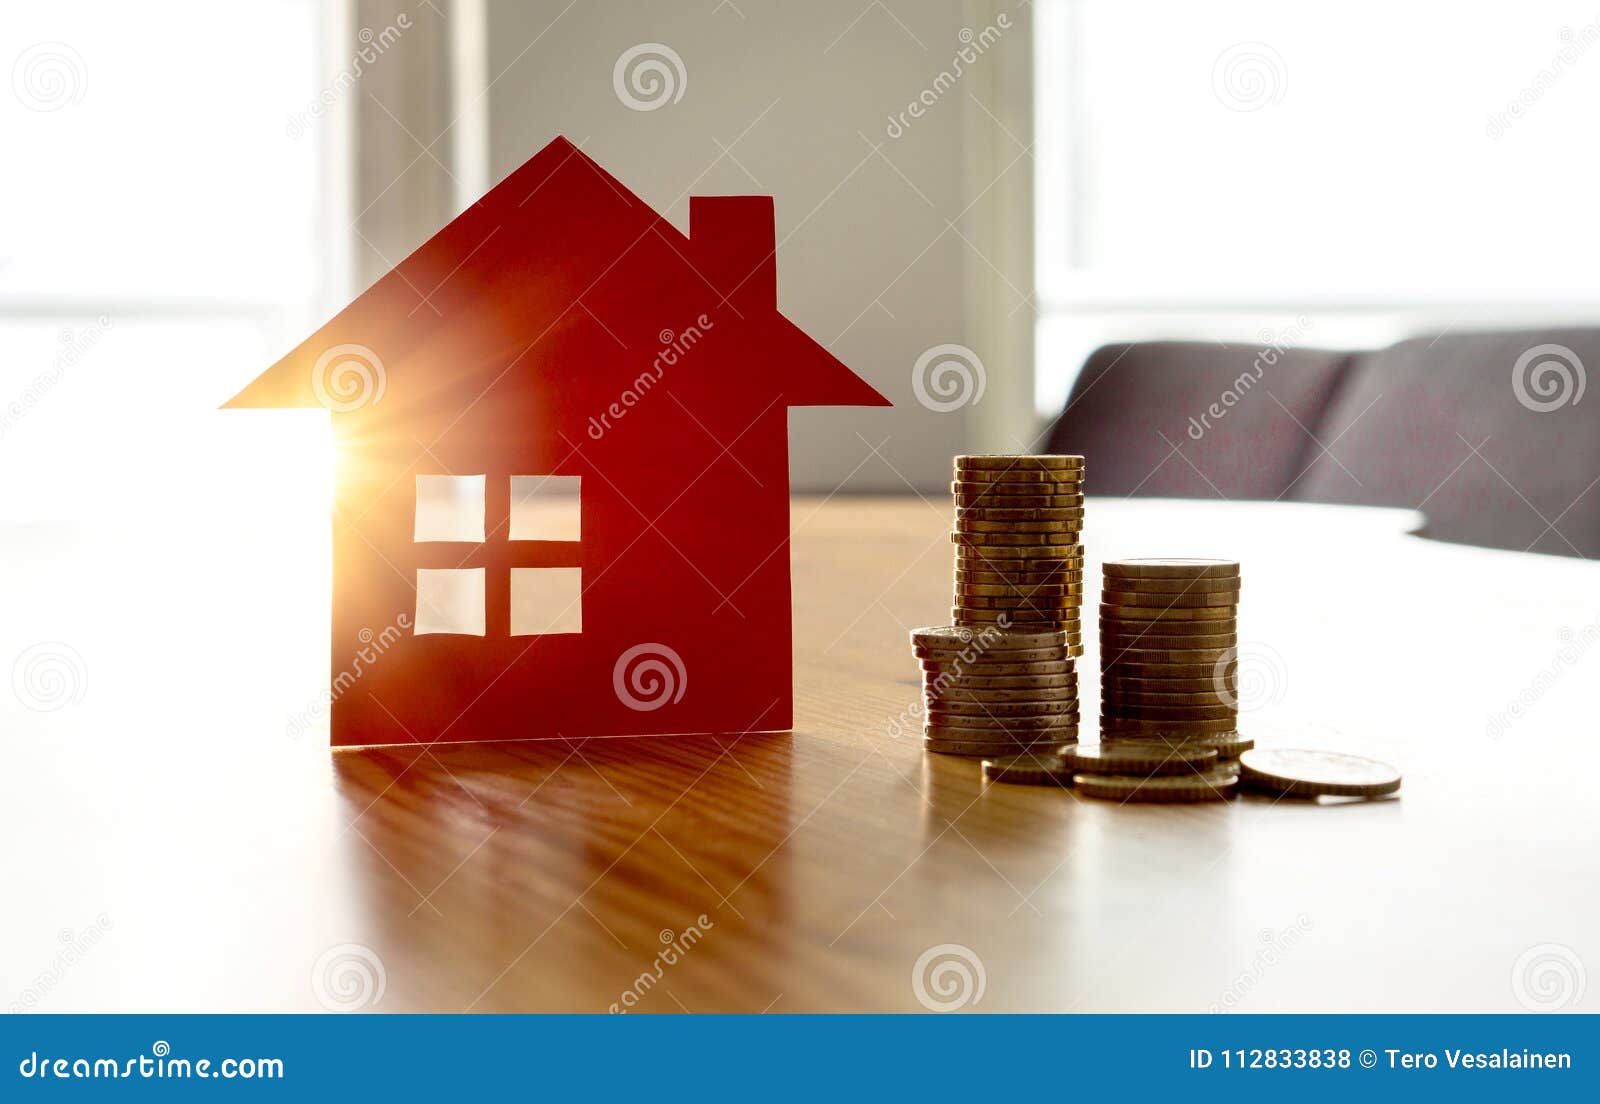 saving money to buy new house. high rent price or home insurance